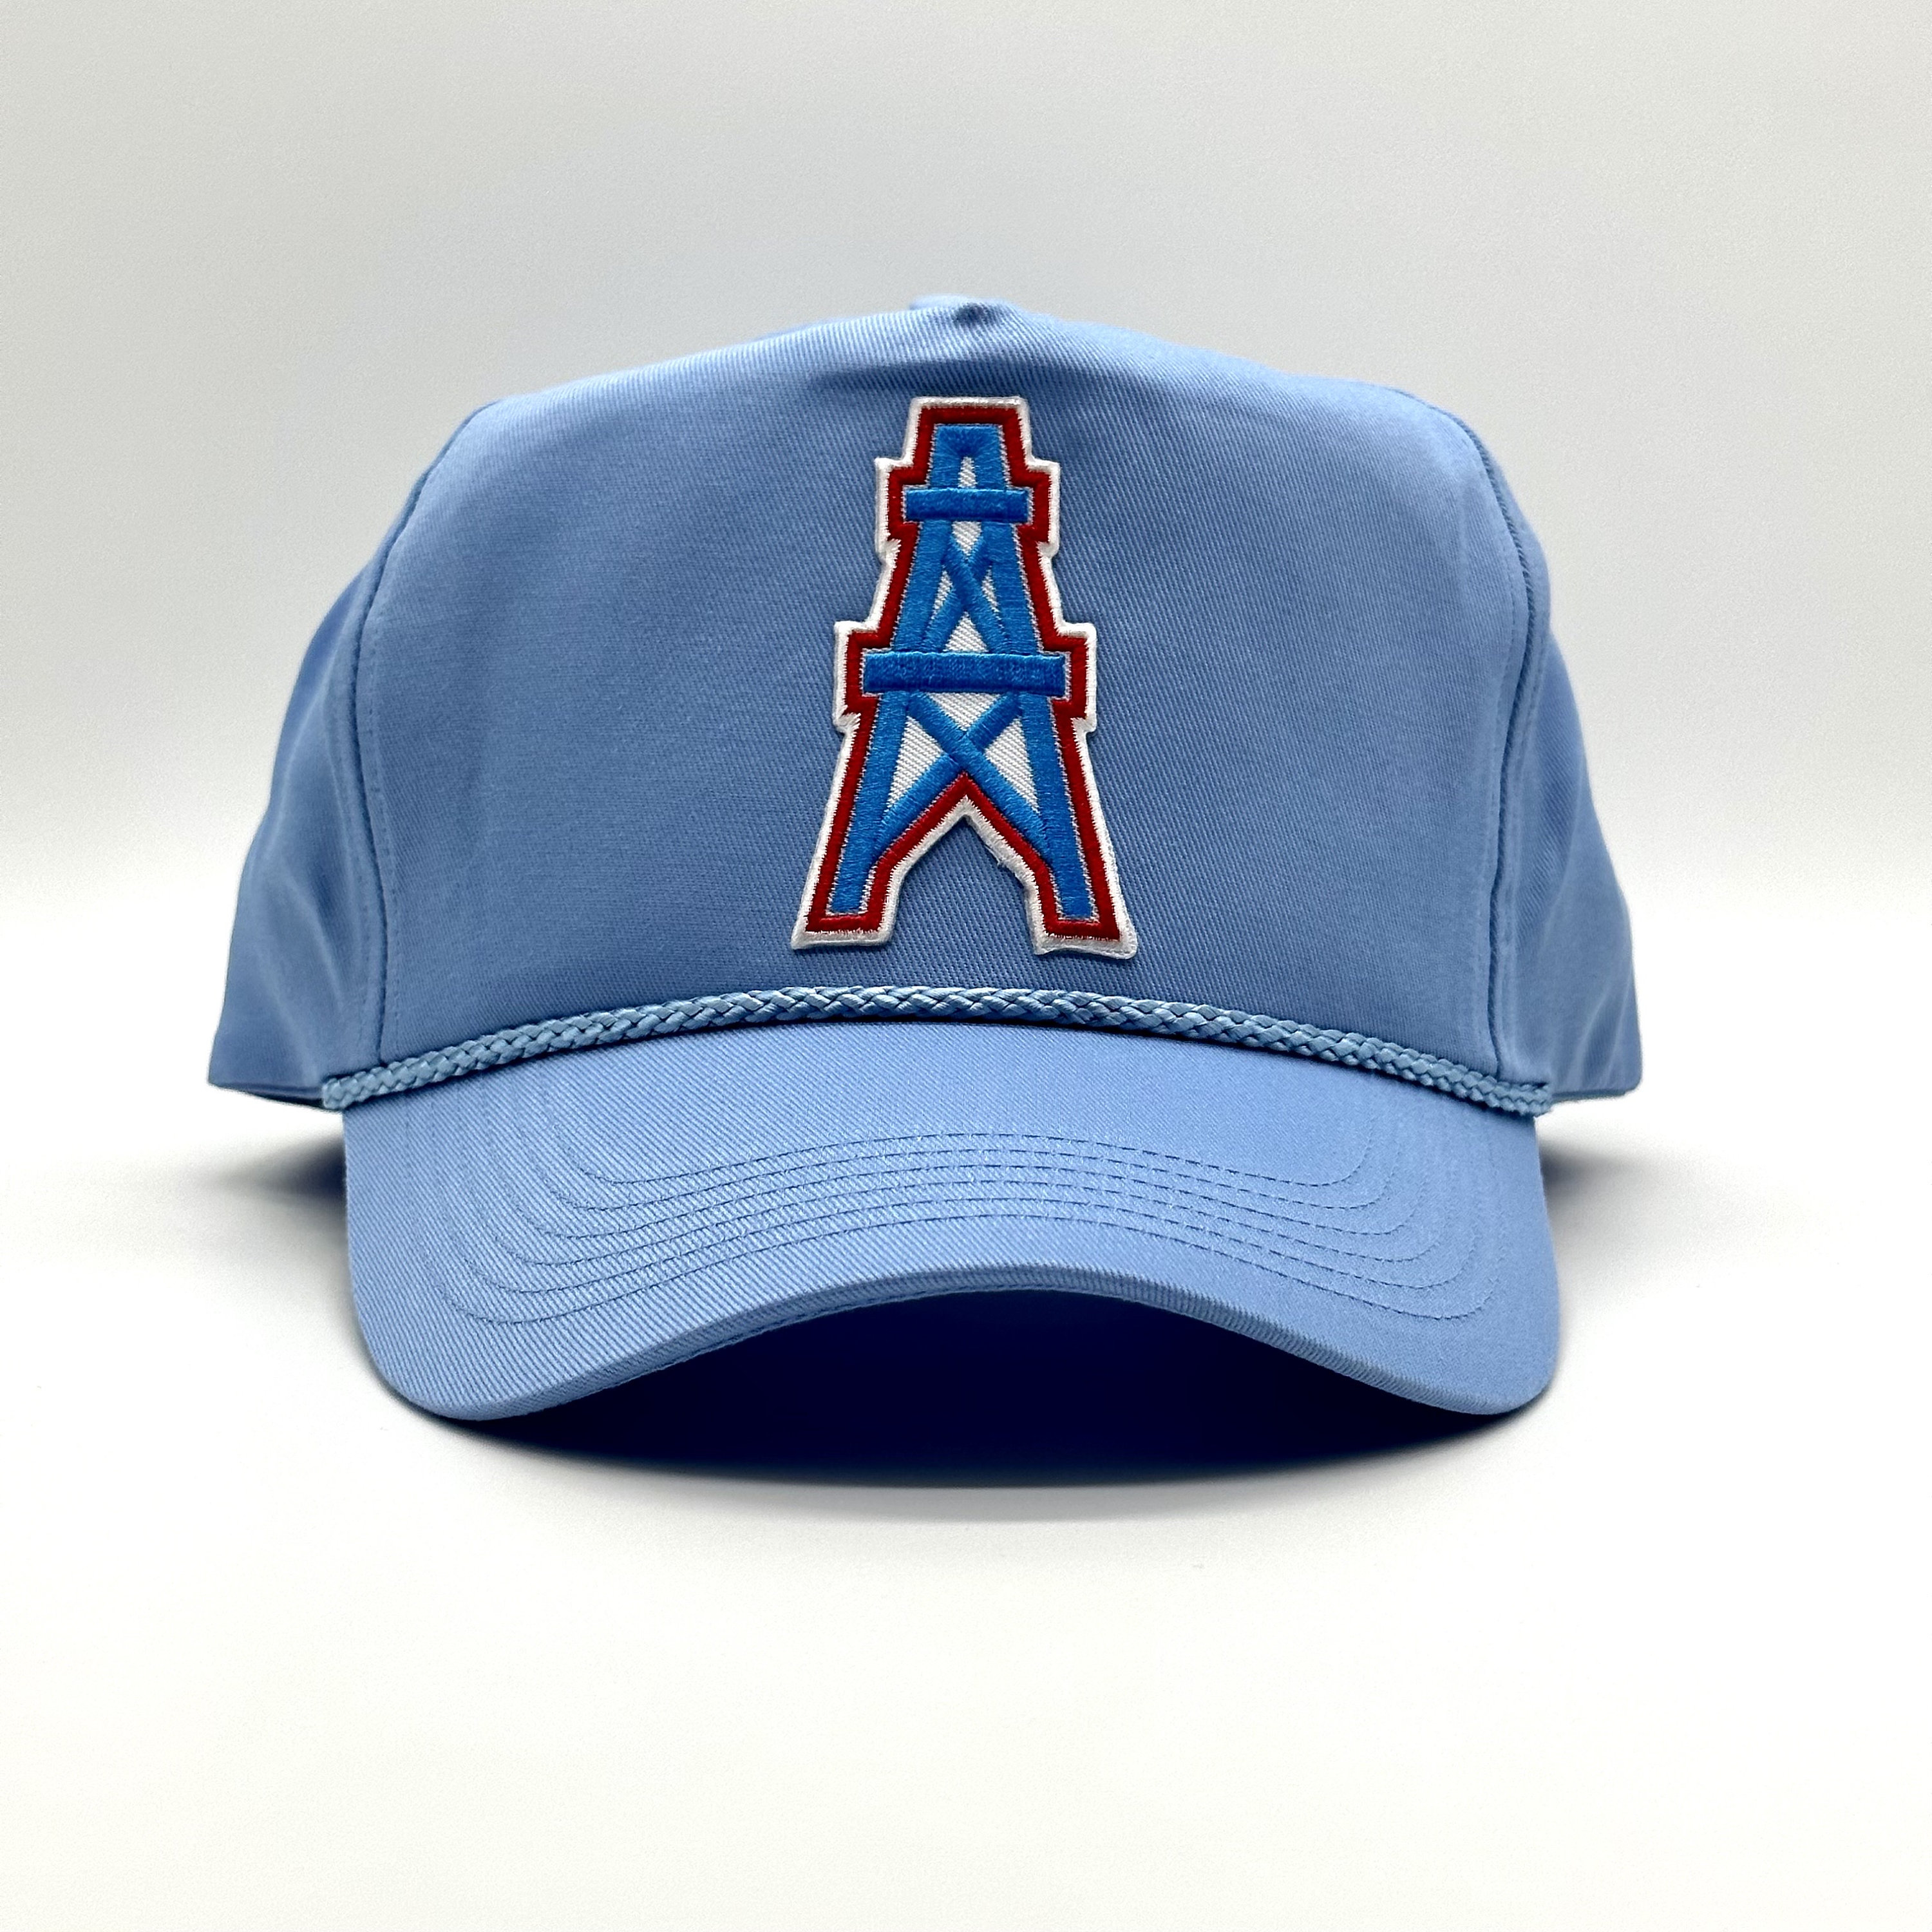 Houston Oilers Football Hat Vintage Retro Patch Baby Blue 